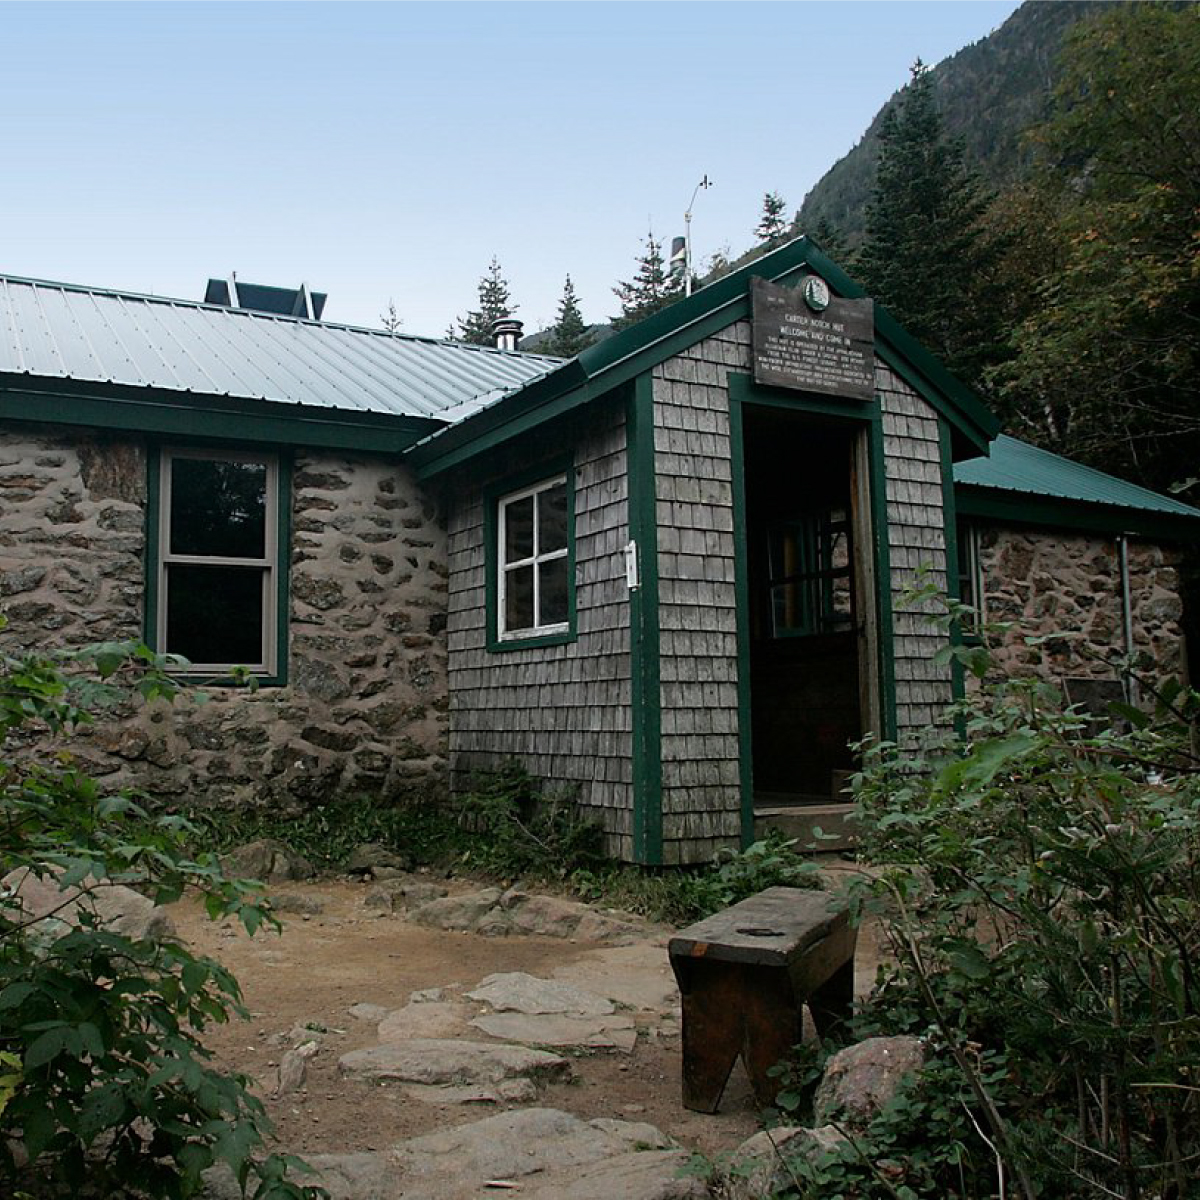 View of the entrance to Carter Notch Hut